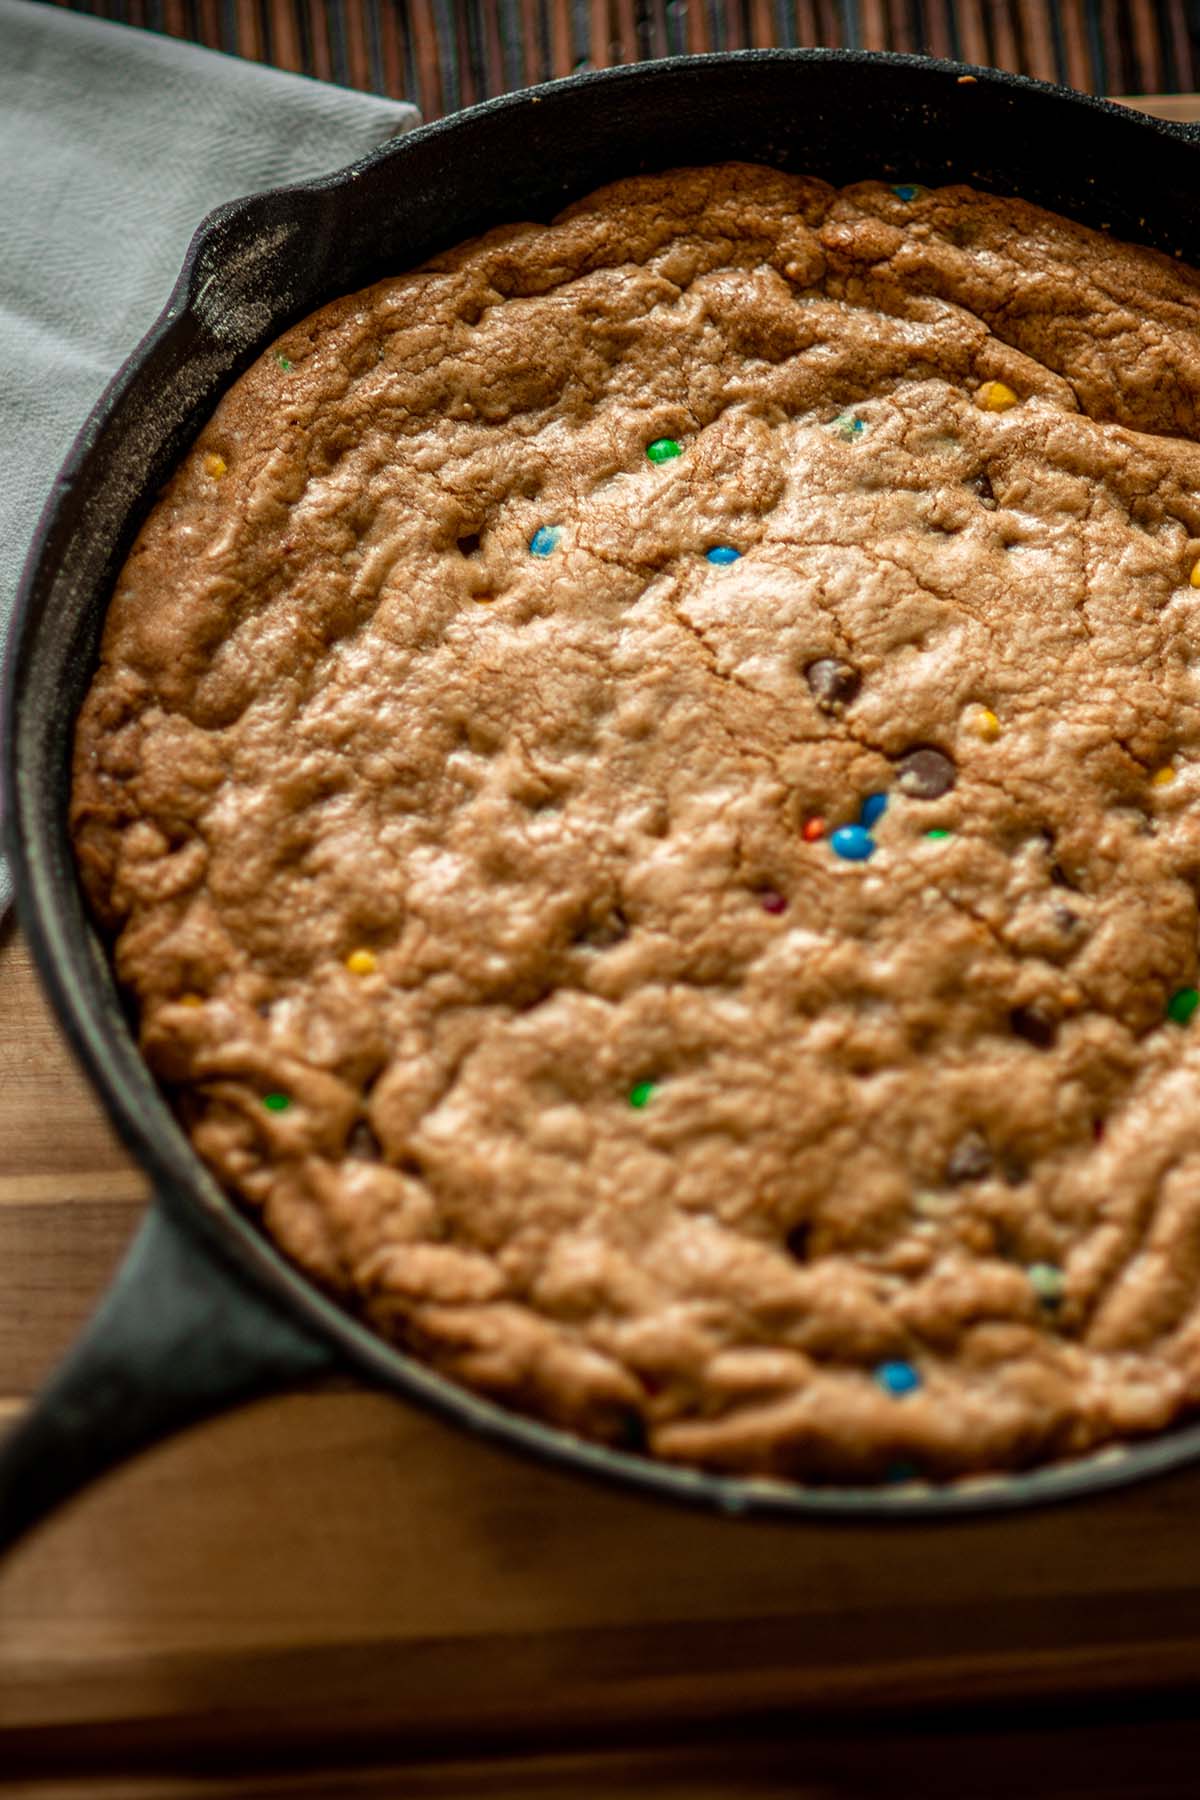 A chocolate chip cast iron cookie.